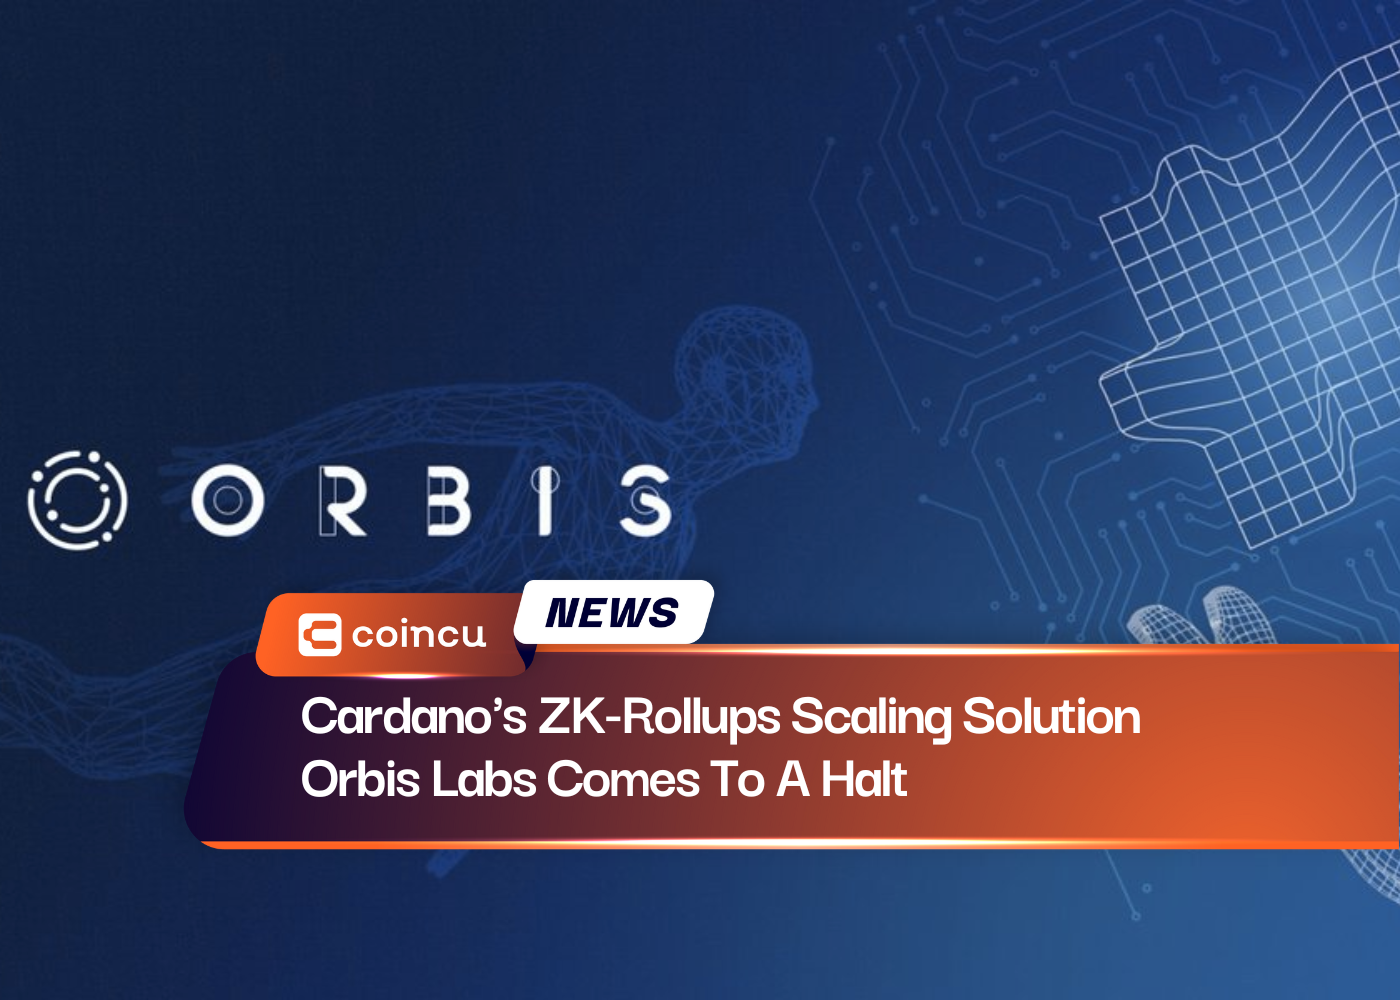 Cardano's ZK-Rollups Scaling Solution Orbis Labs Comes To A Halt